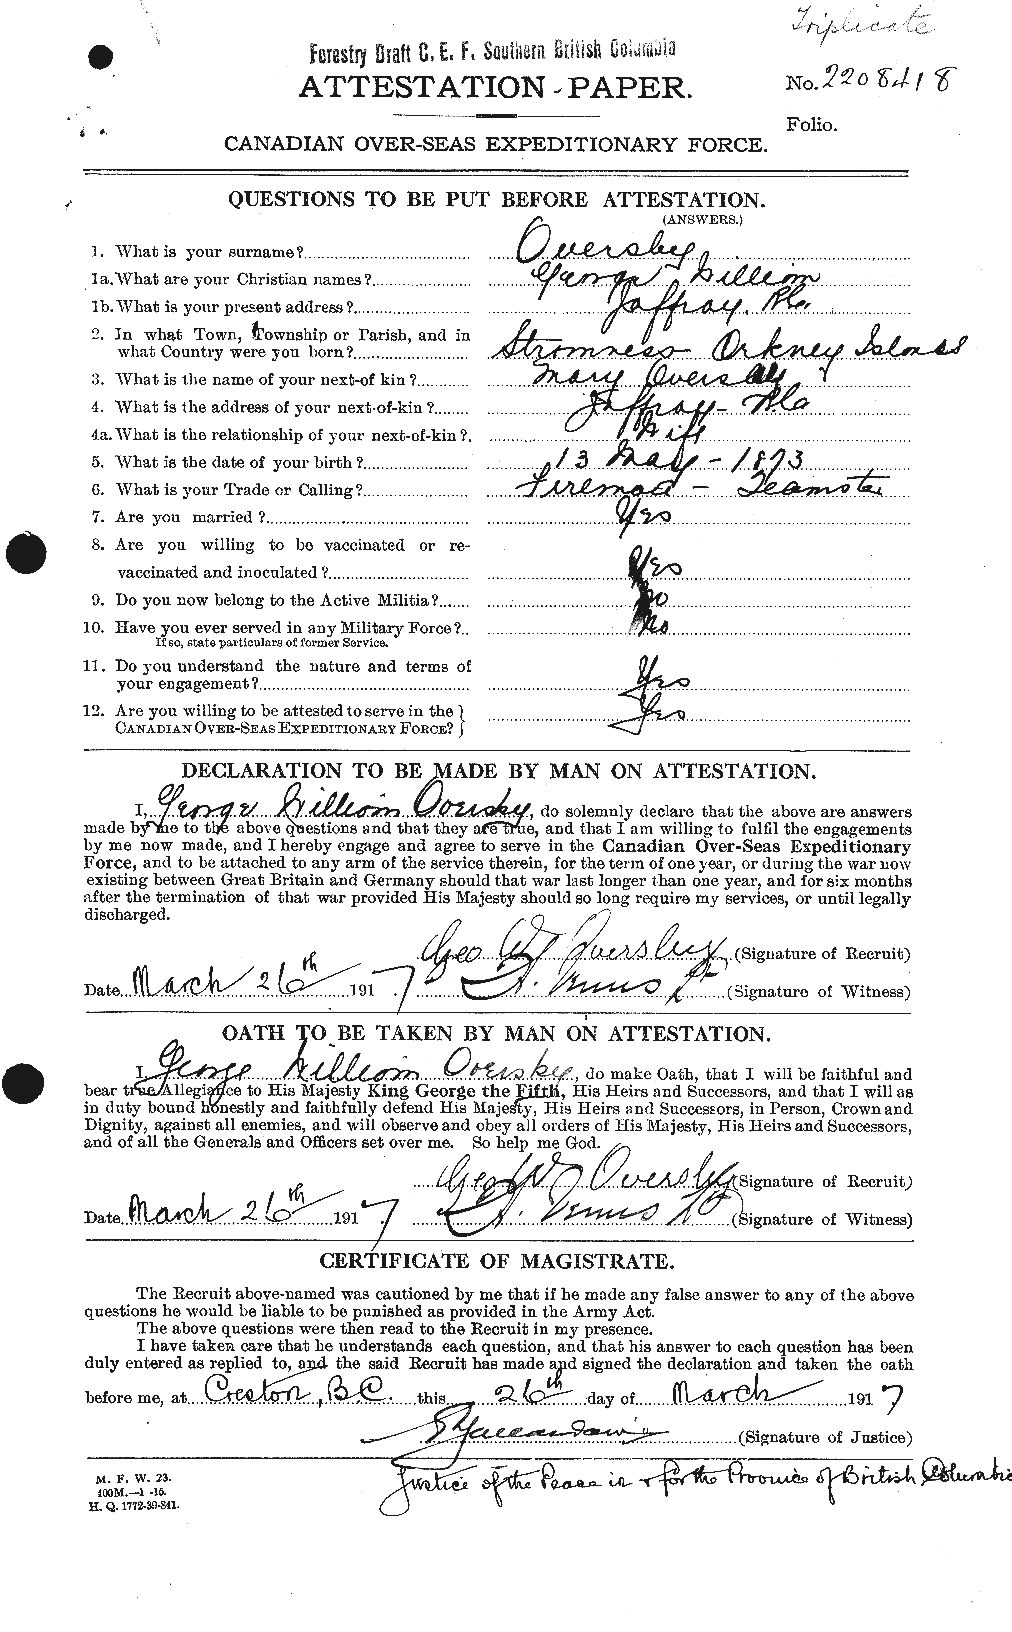 Personnel Records of the First World War - CEF 561131a